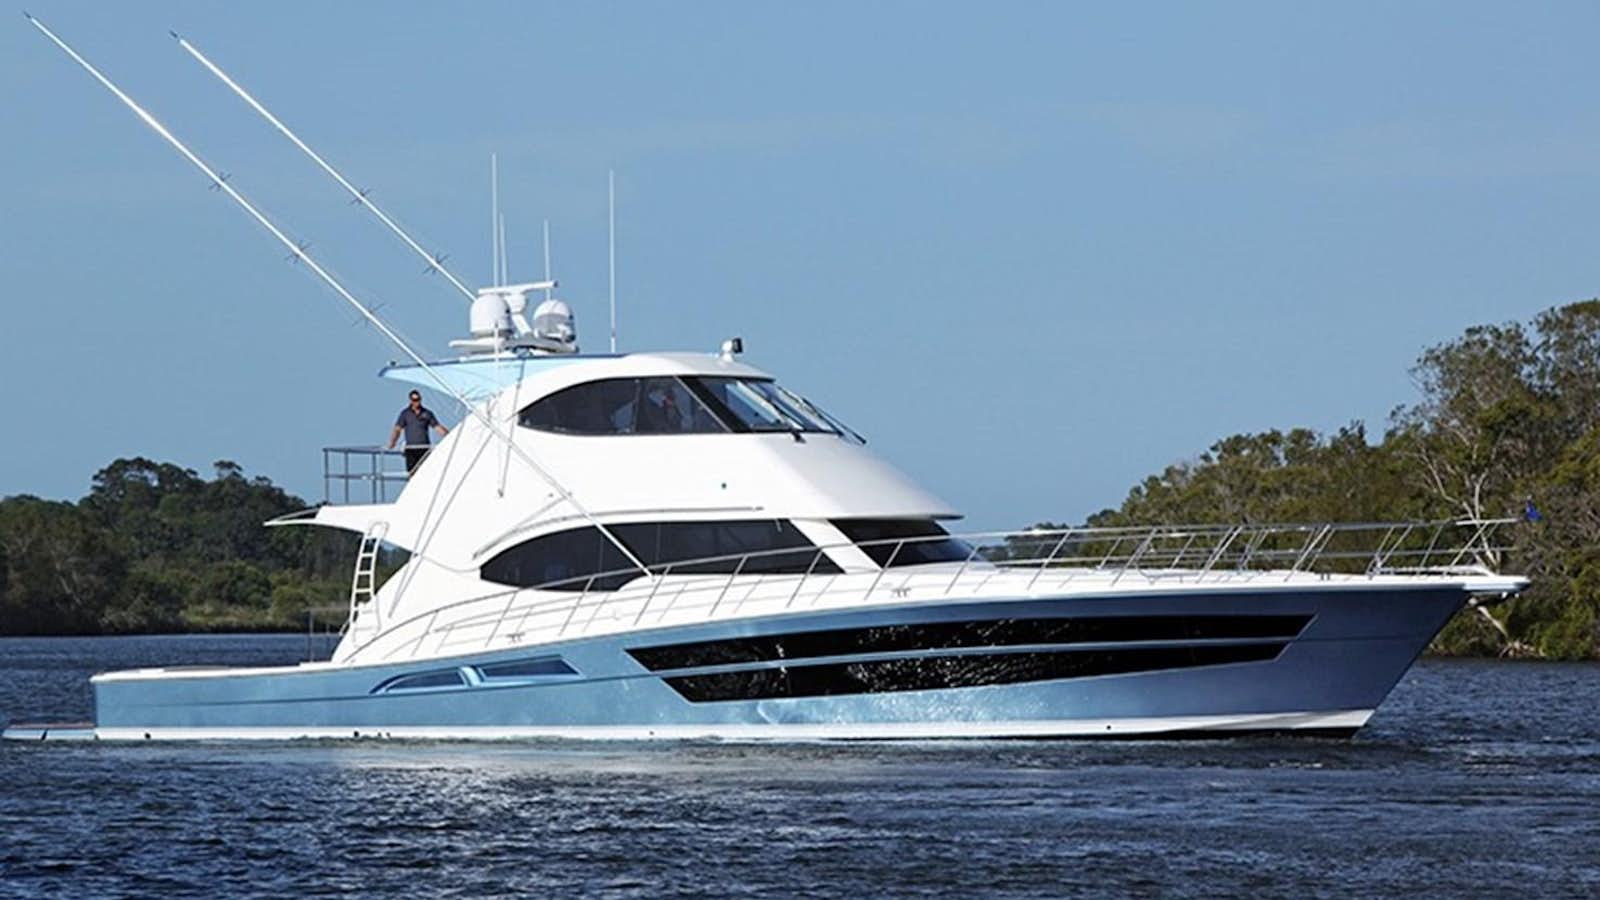 Life serenity
Yacht for Sale